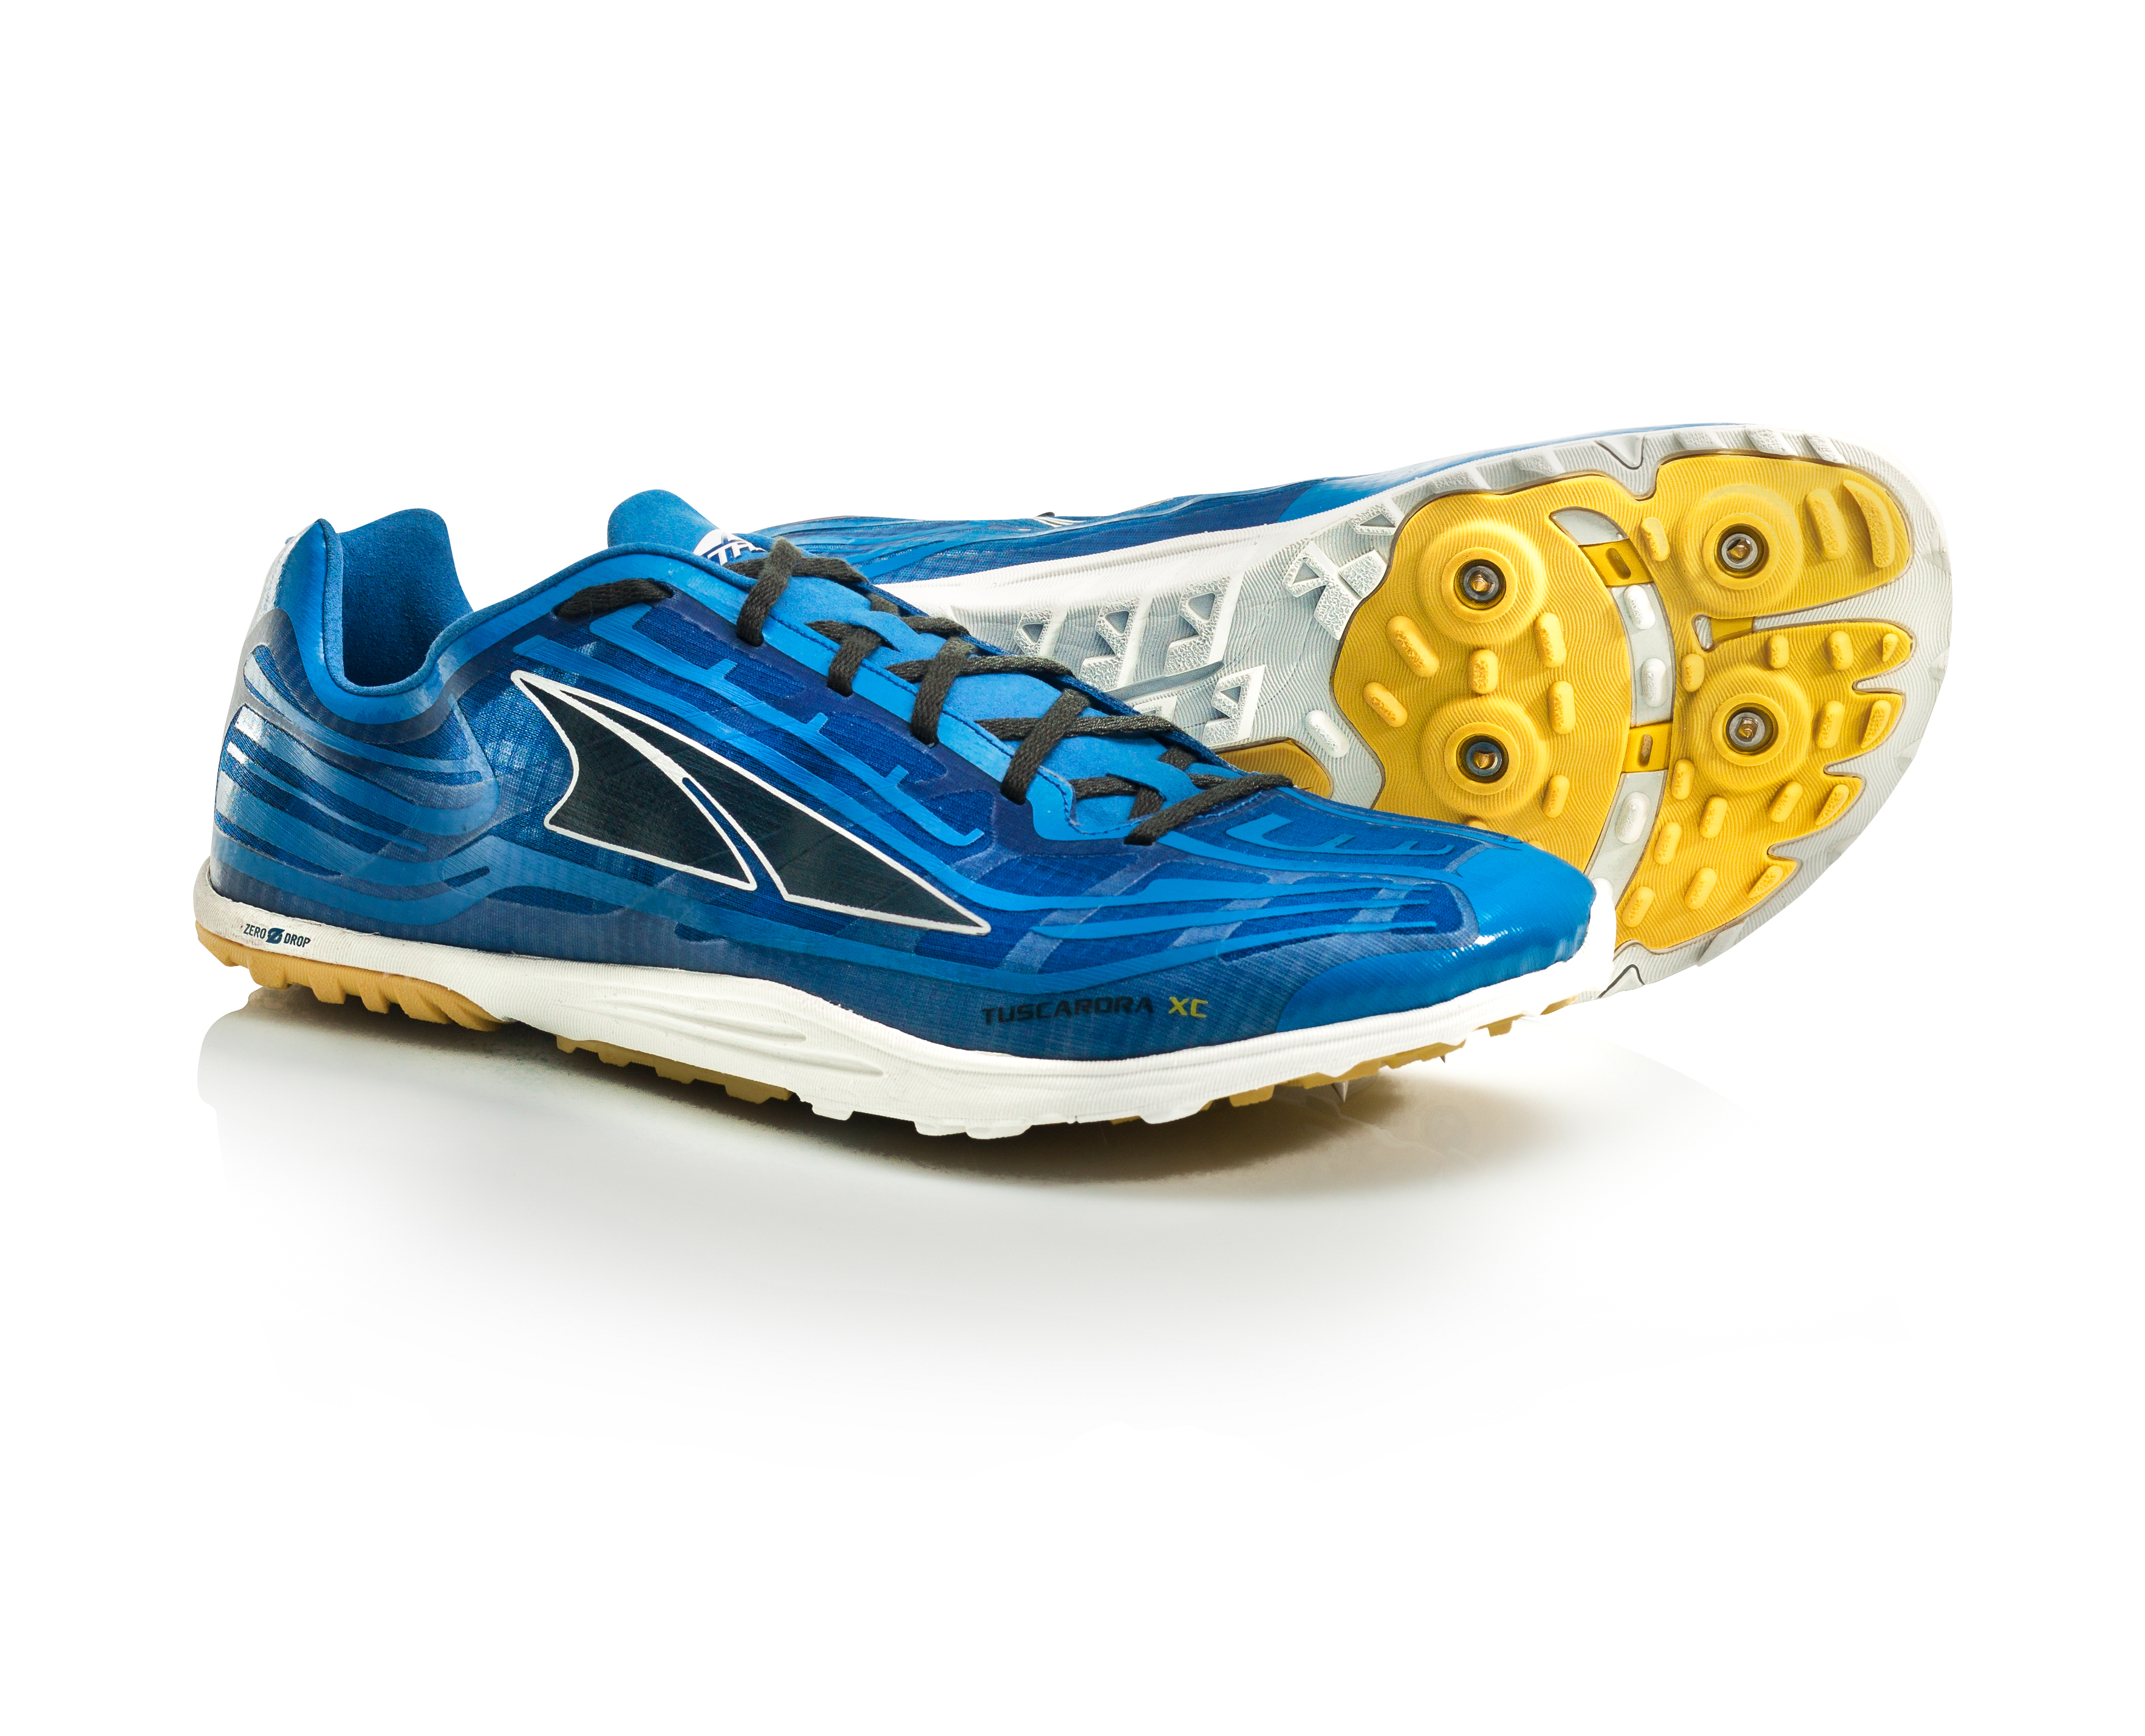 Altra Footwear Continues Innovation 